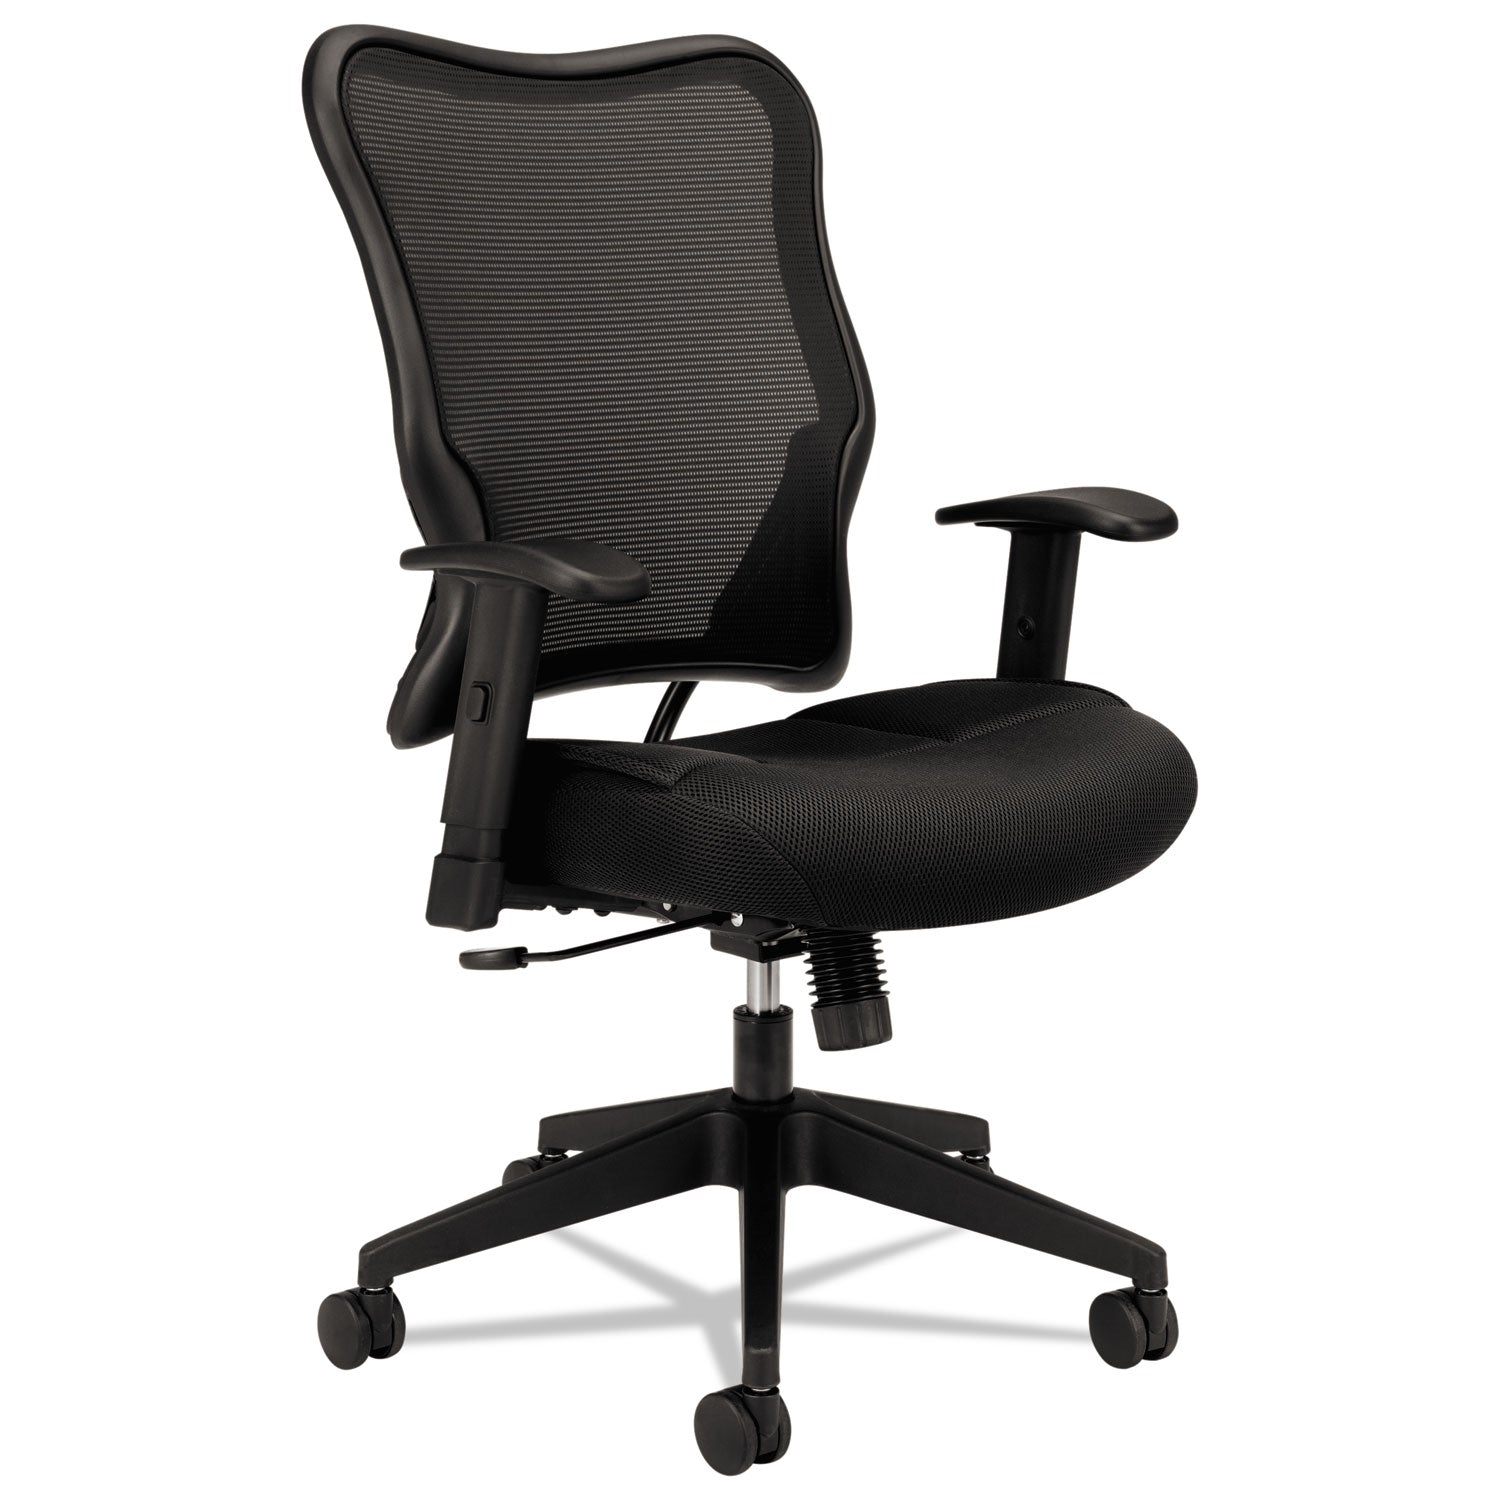 VL702 Mesh High-Back Task Chair, Supports Up to 250 lb, 18.5" to 23.5" Seat Height, Black - 